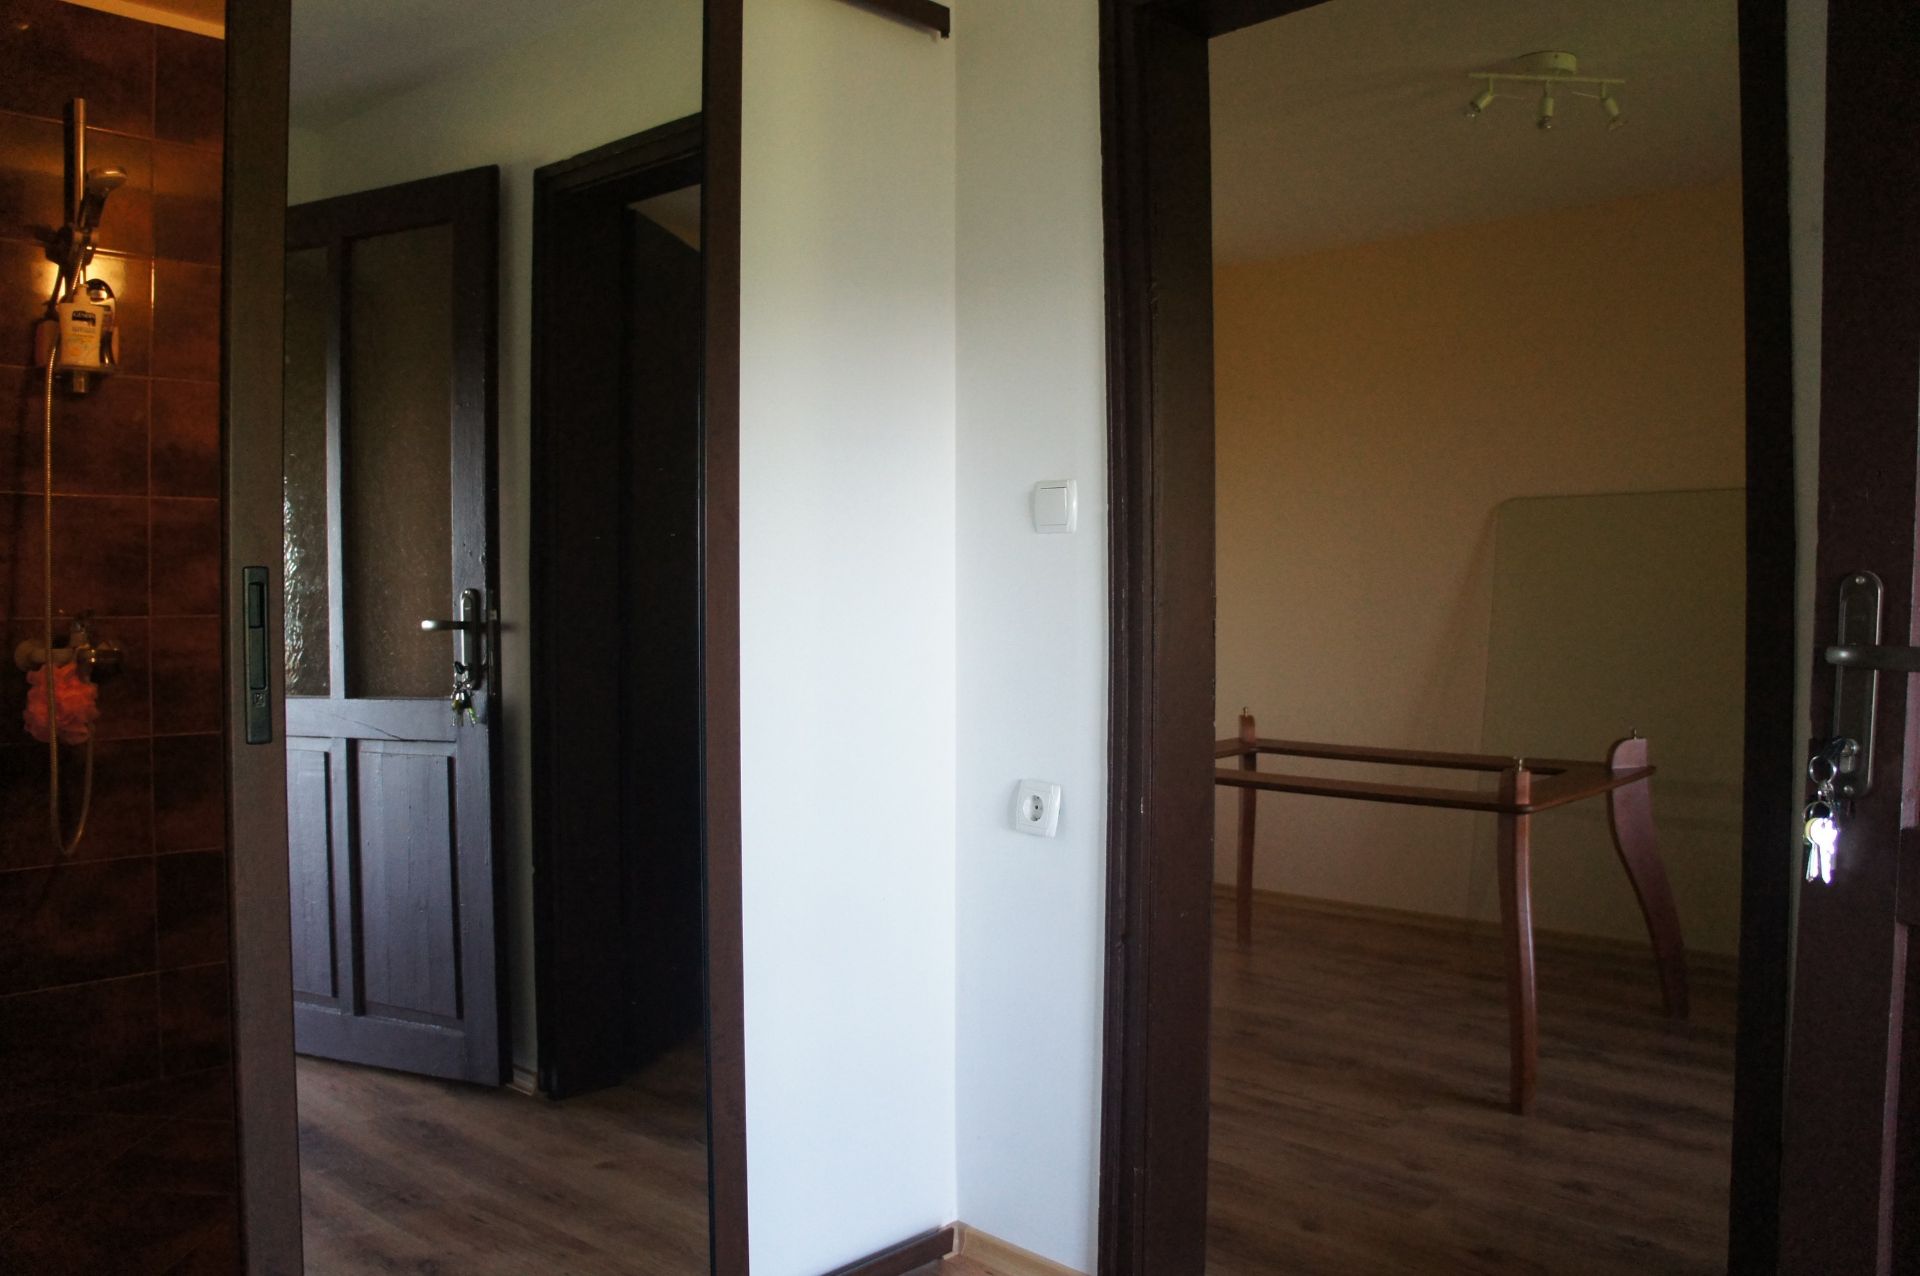 FABULOUS freehold home and land in Bulgaria, ONLY 10 minfrom Lovech! - Image 17 of 32